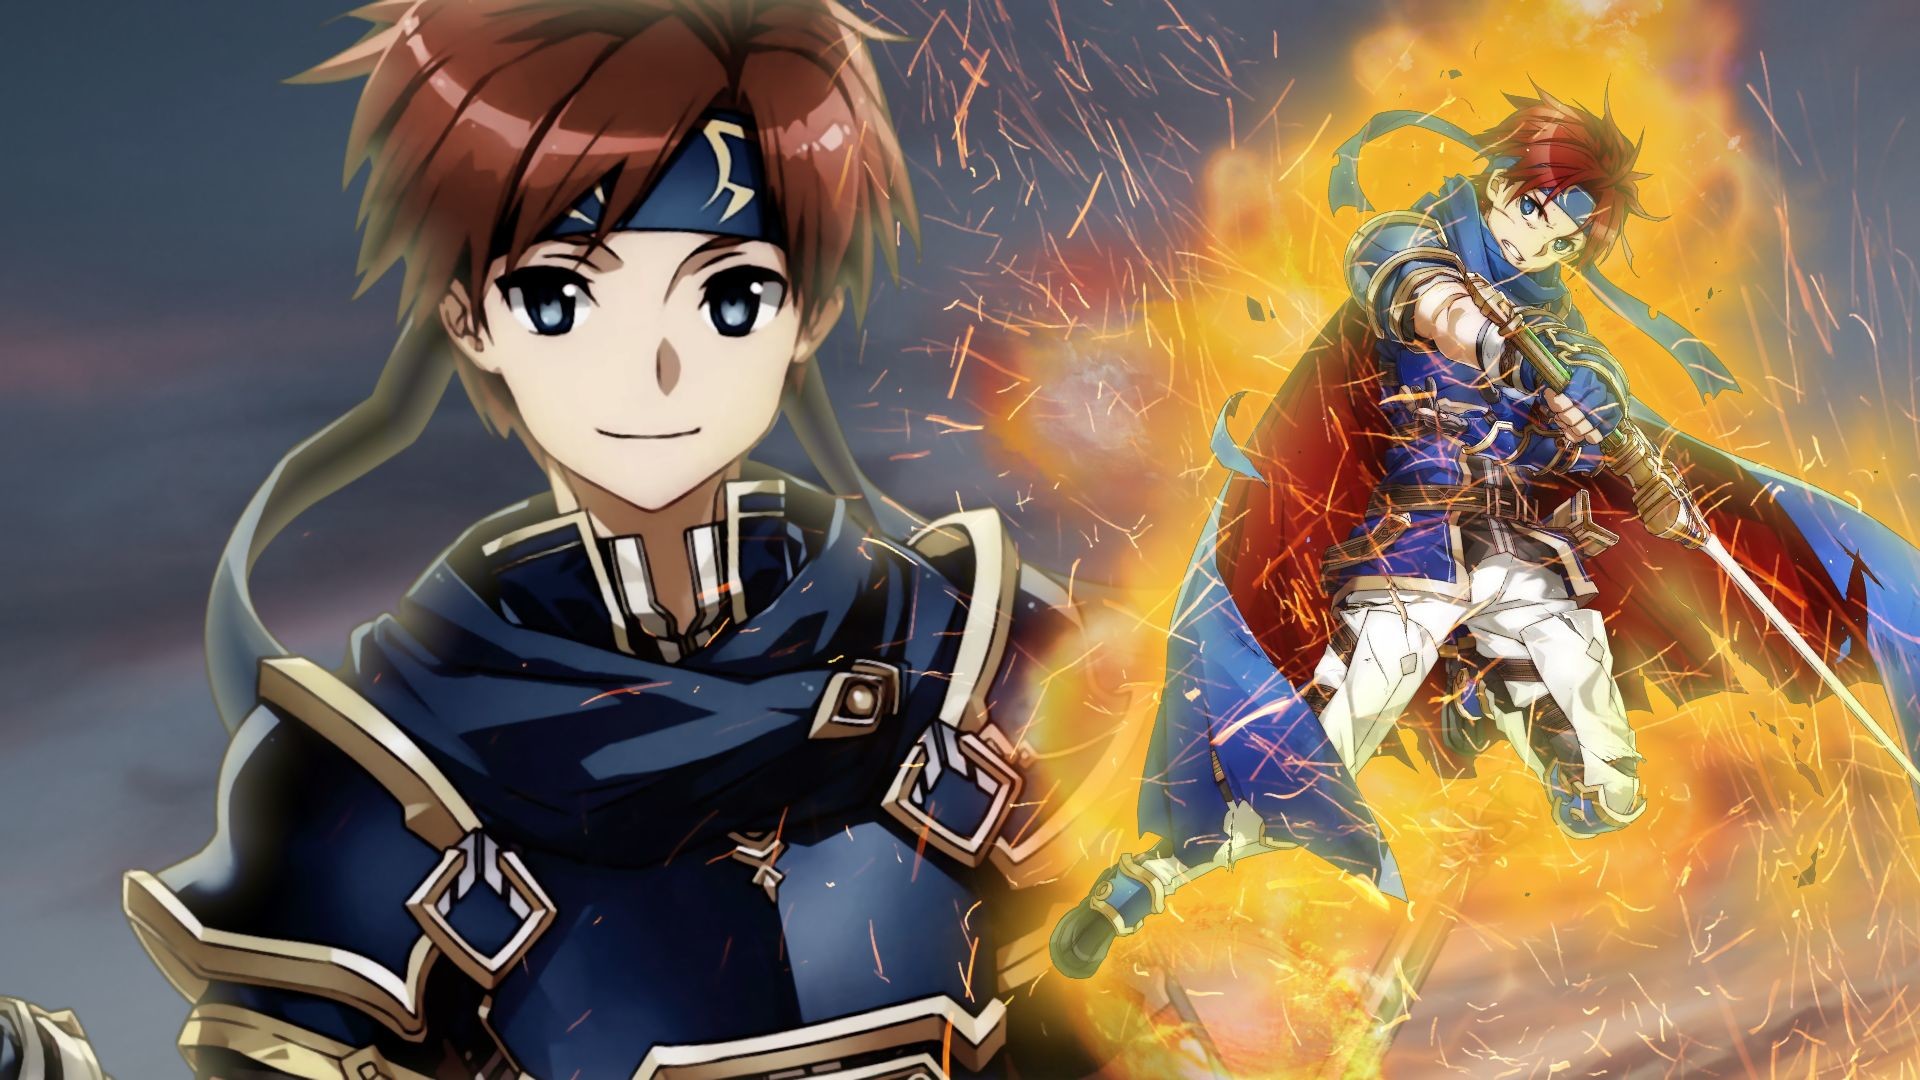 1920x1080 ... Fire Emblem Heroes Wallpaper - Roy by IncognitoZA